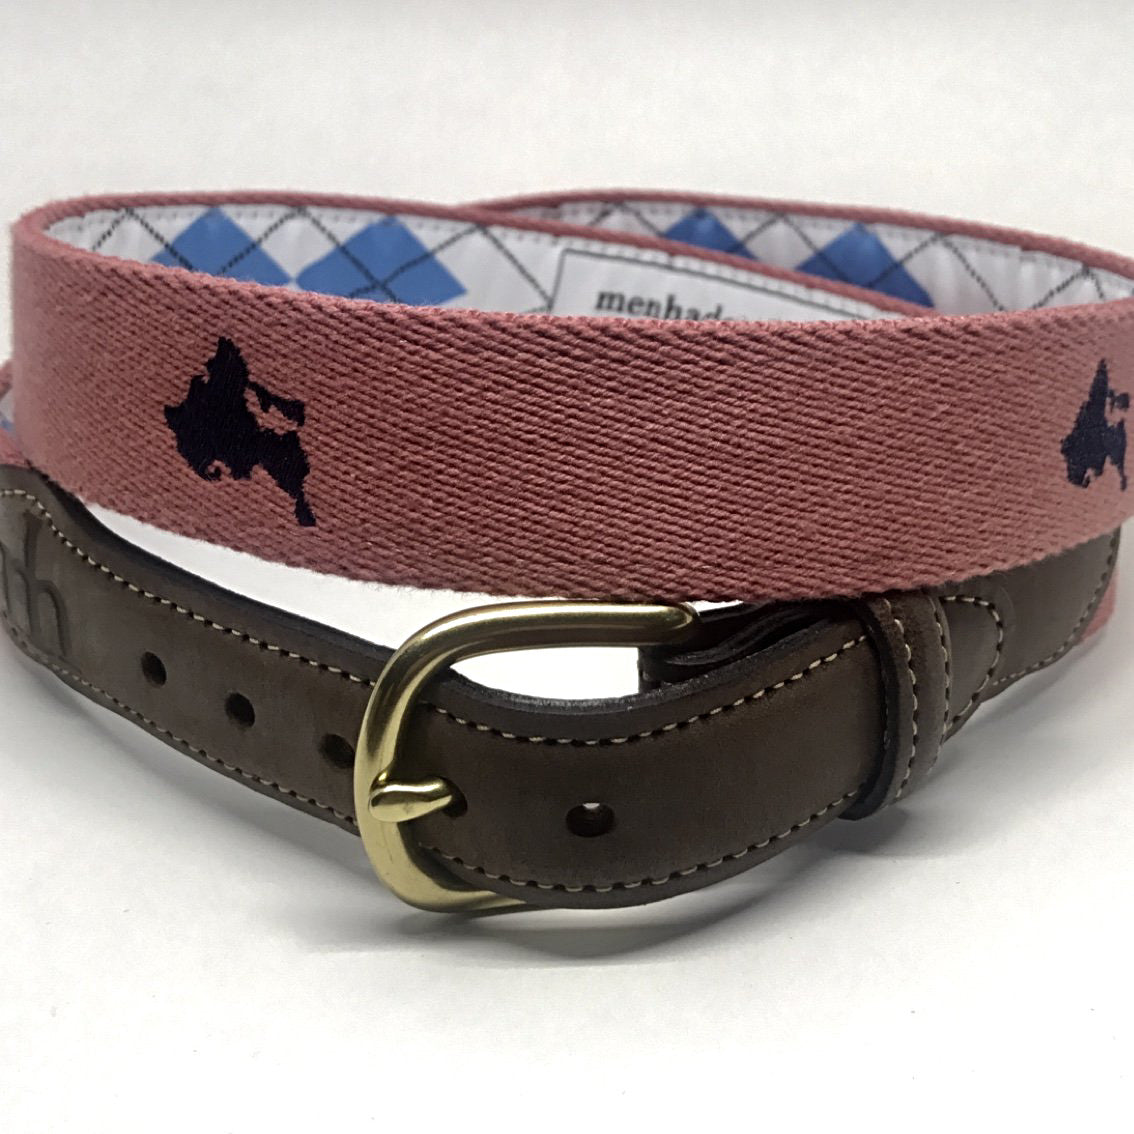 The “Shelter Island” Embroidered on Nantucket Red with Navy